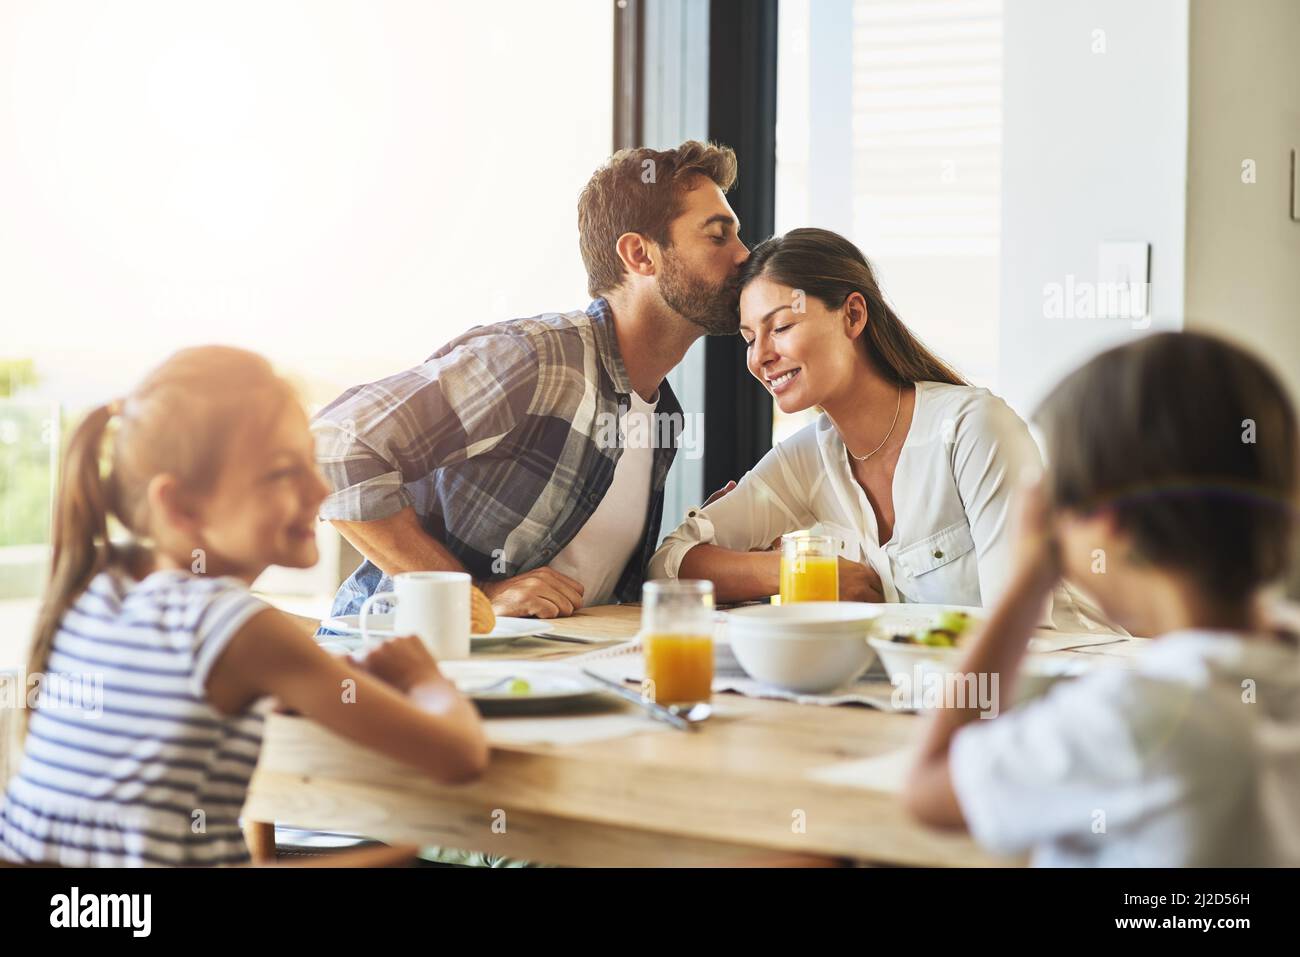 Their home is filled with love and happiness. Shot of a family having breakfast together at home. Stock Photo